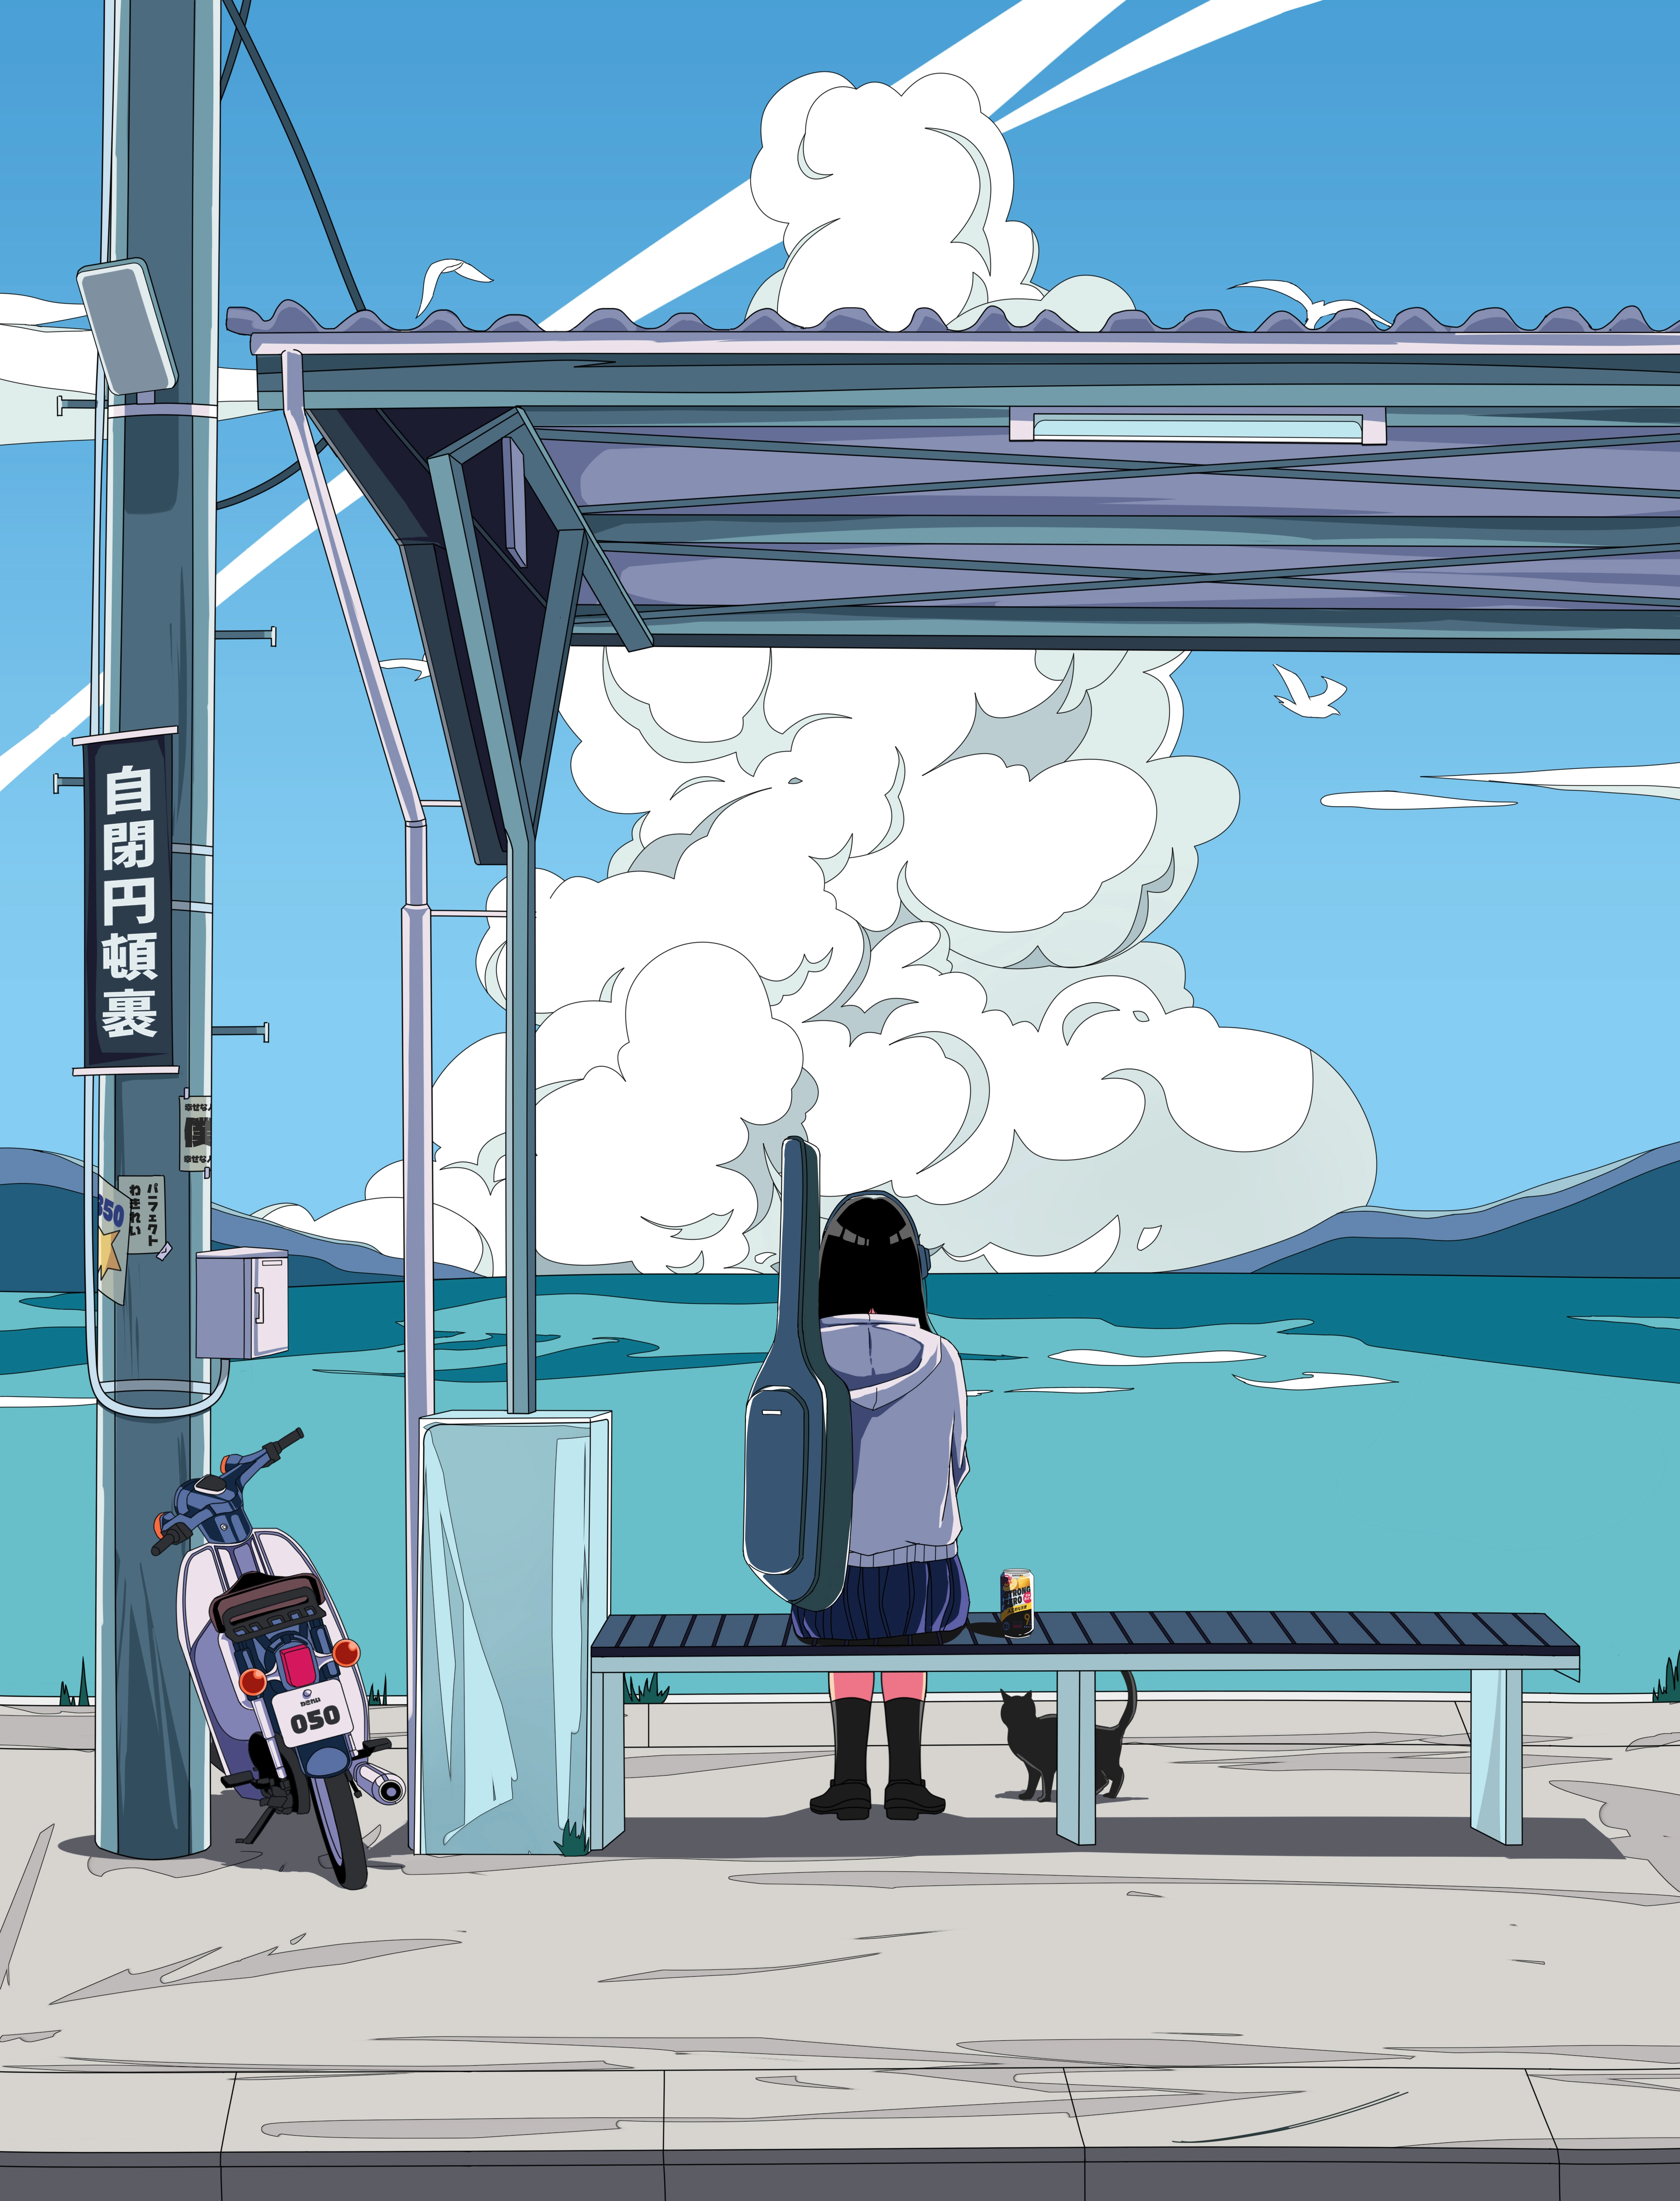 Anime 3700x4848 digital art artwork illustration sitting women cats clouds bus stop motorcycle black cats white hoodie portrait display water anime girls vehicle sky Japanese bench animals can drink